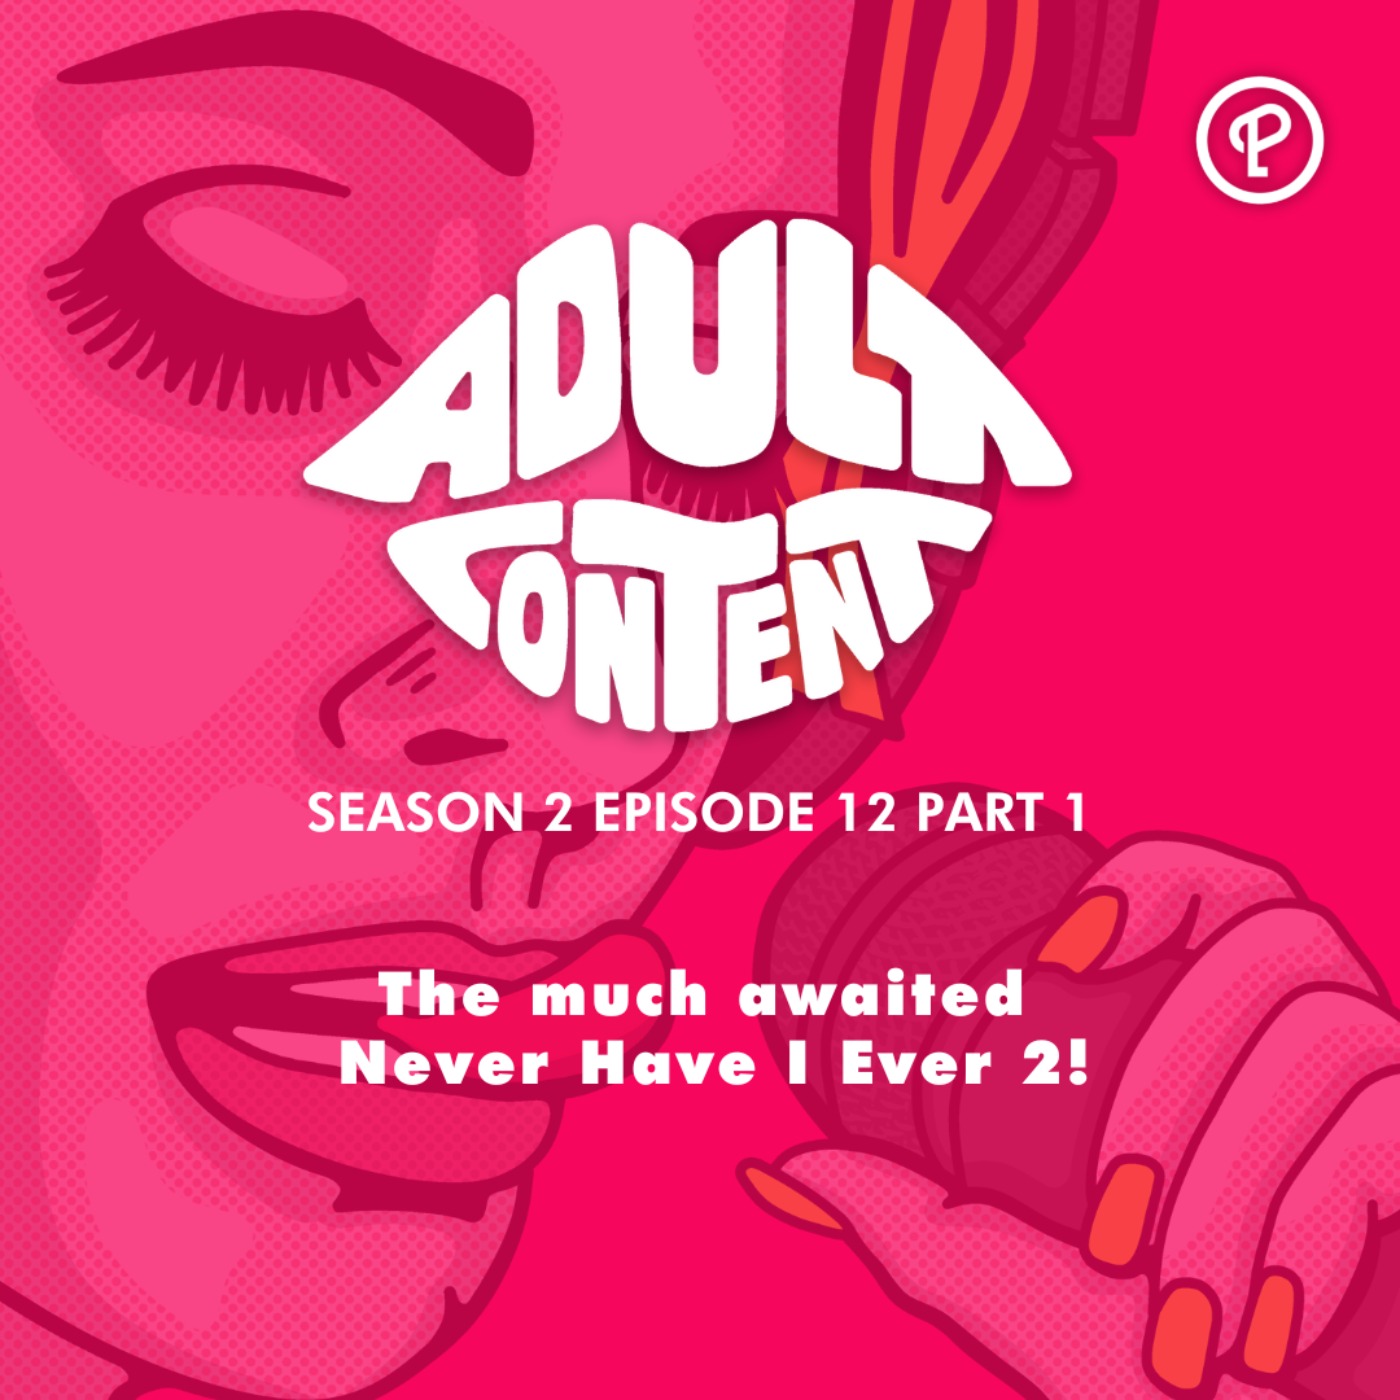 S2E12 Pt. 1: The much awaited Never Have I Ever 2!